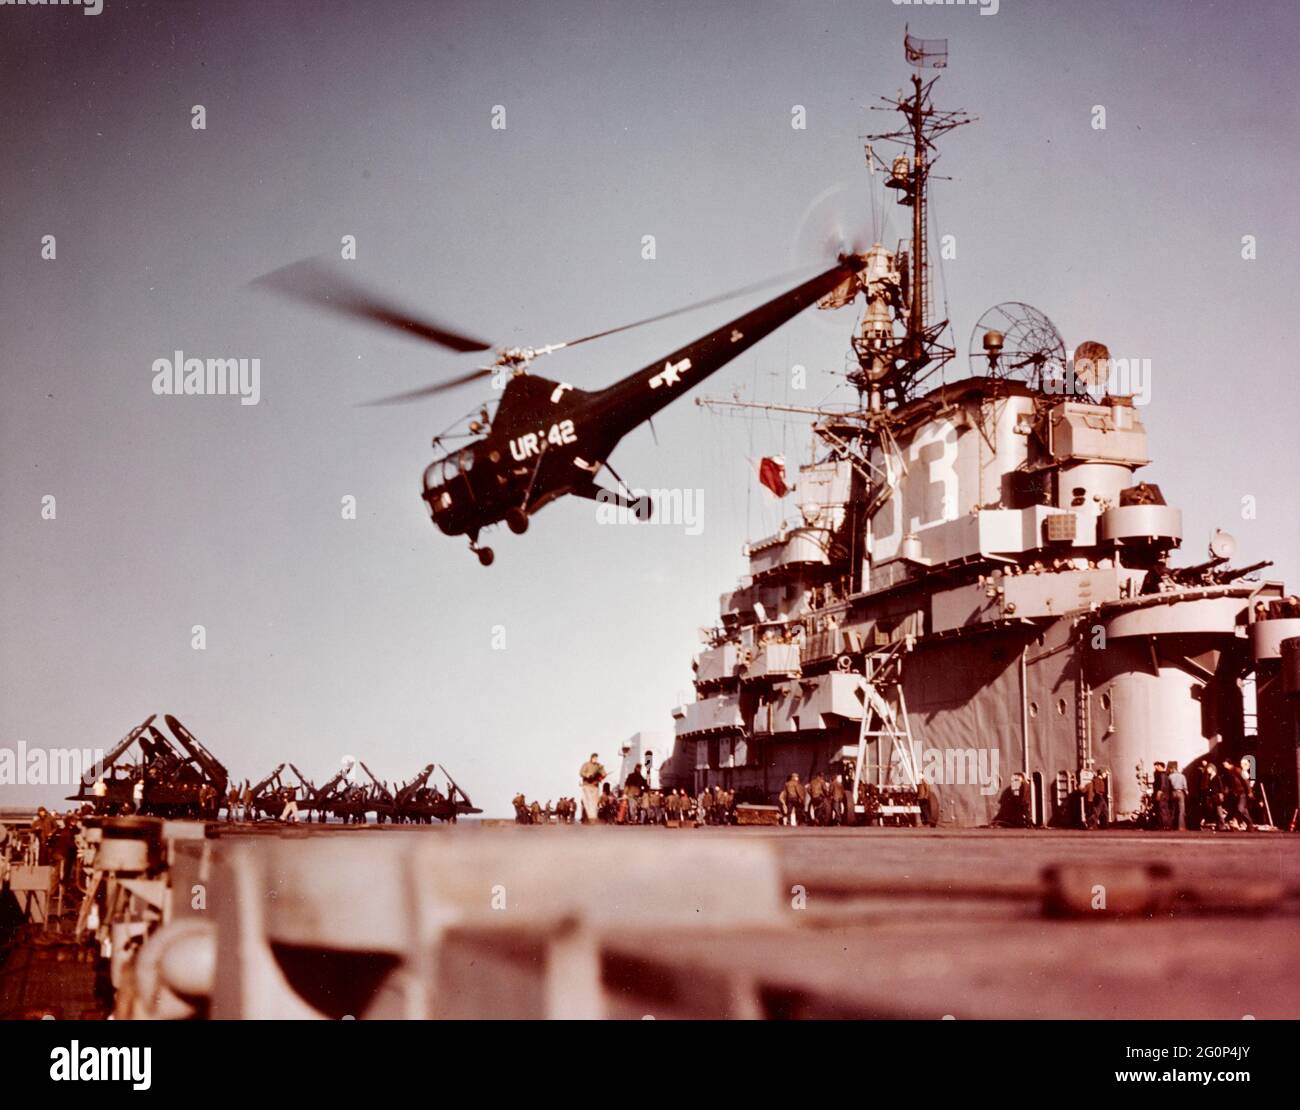 USS Kearsarge (CV-33) Sikorsky HO3S-1 helicopter in flight over the carrier's flight deck, during Operation Frigid. Official U.S. Navy Photograph Stock Photo